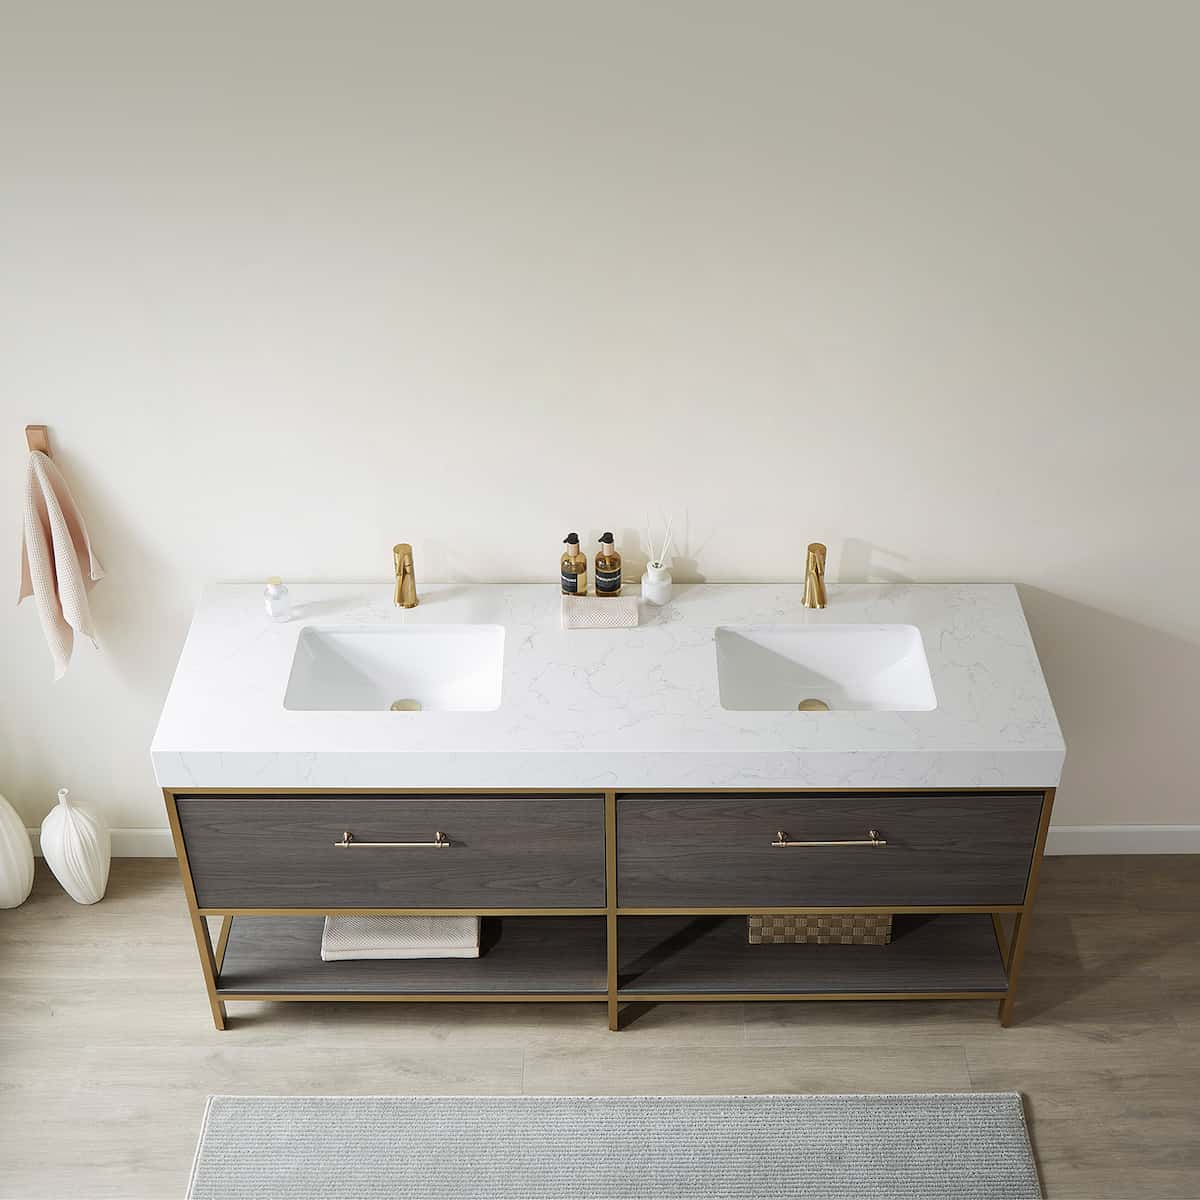 Vinnova Palma 72 Inch Freestanding Double Sink Bath Vanity in Suleiman Oak with White Composite Grain Stone Without Mirror Sinks 701272G-SO-GW-NM